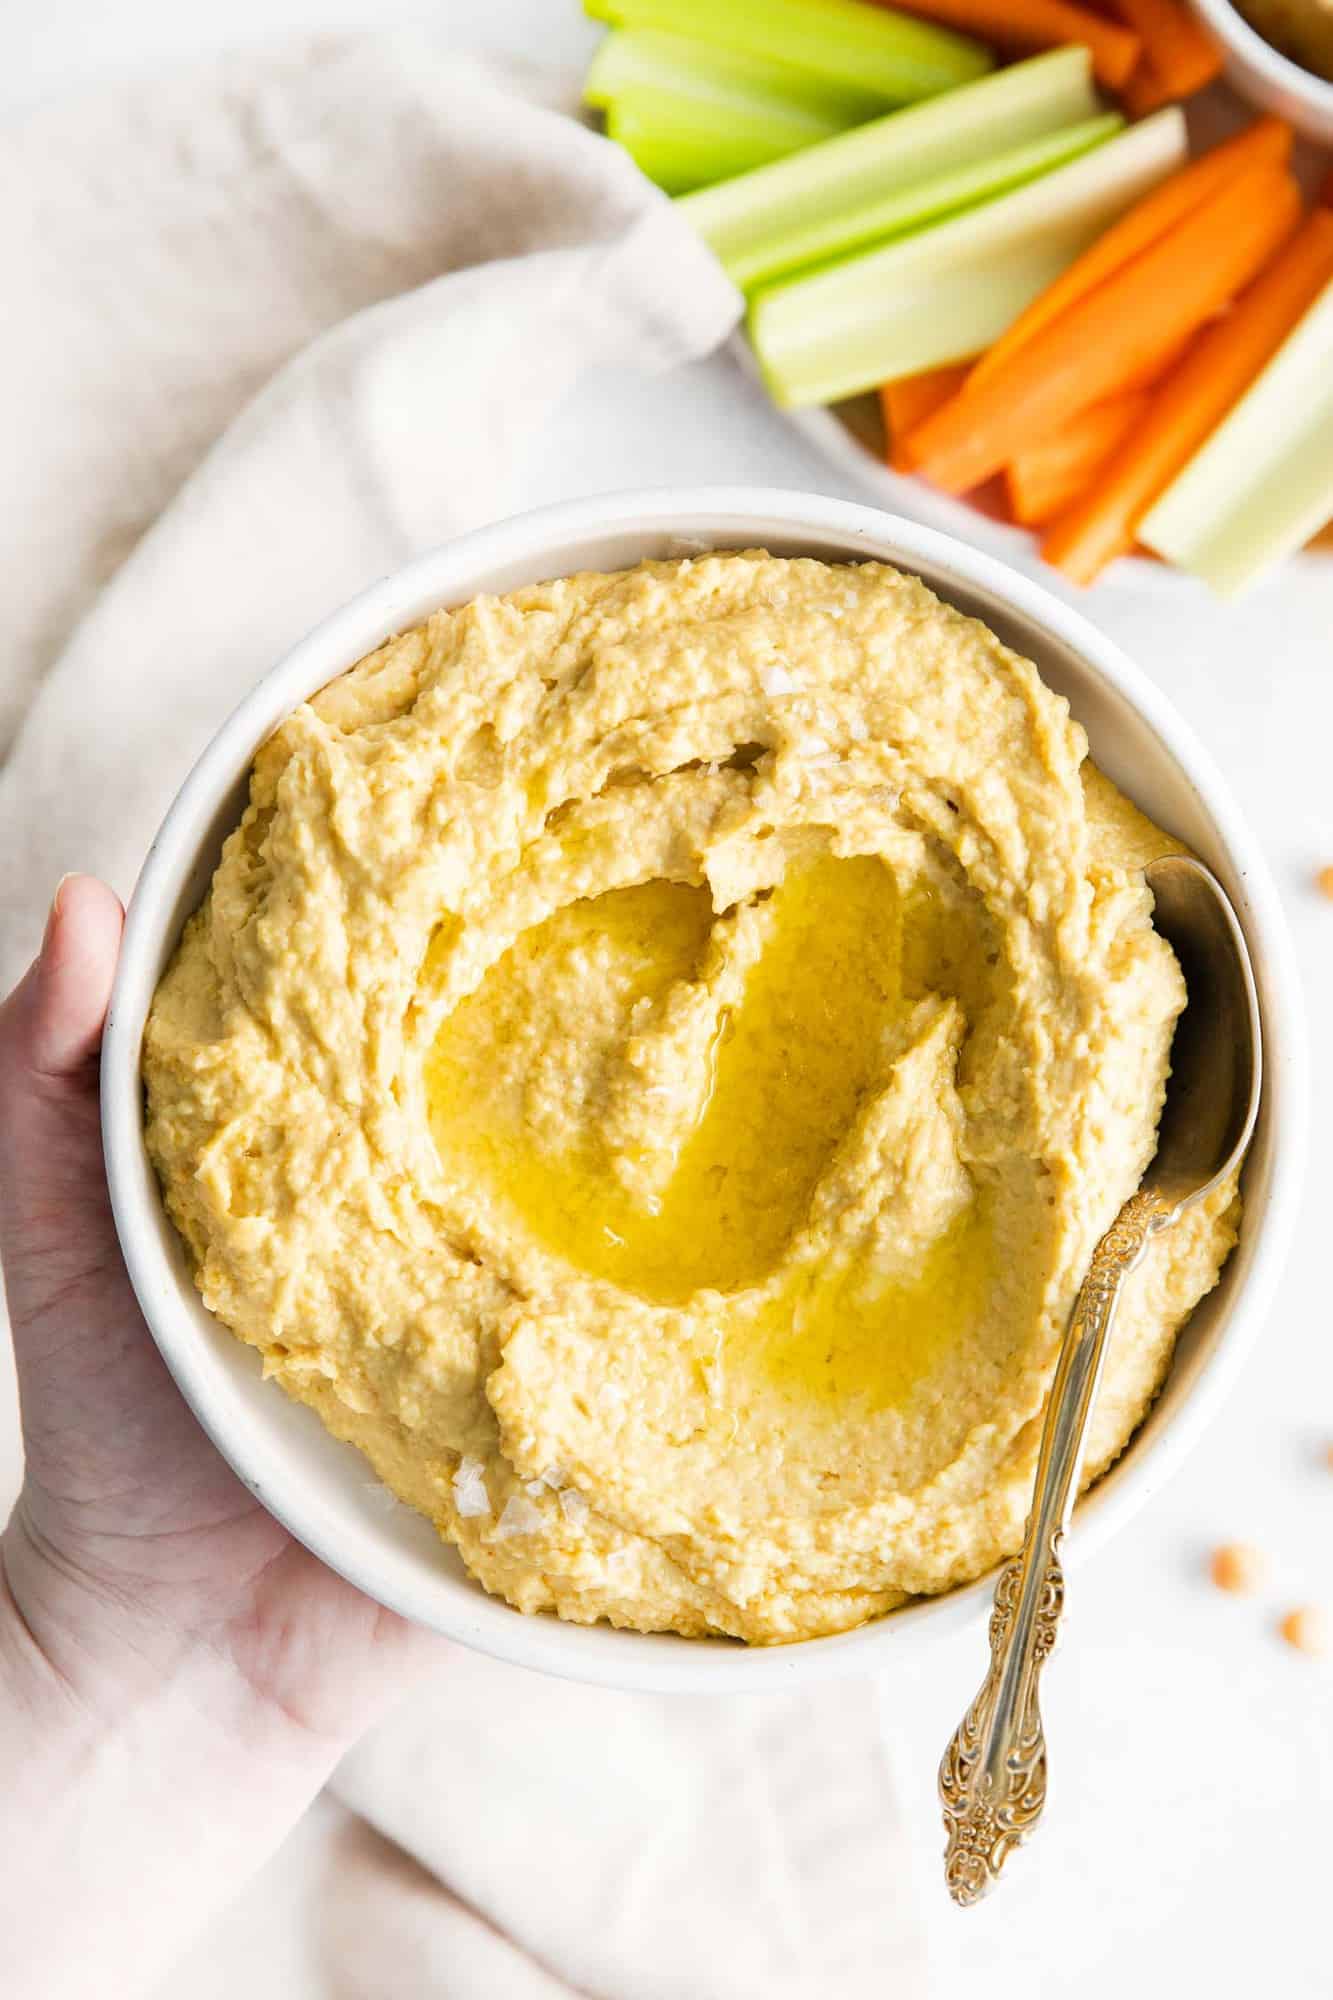 Bowl of hummus being held in a hand. Carrot sticks and celery sticks are also visible.